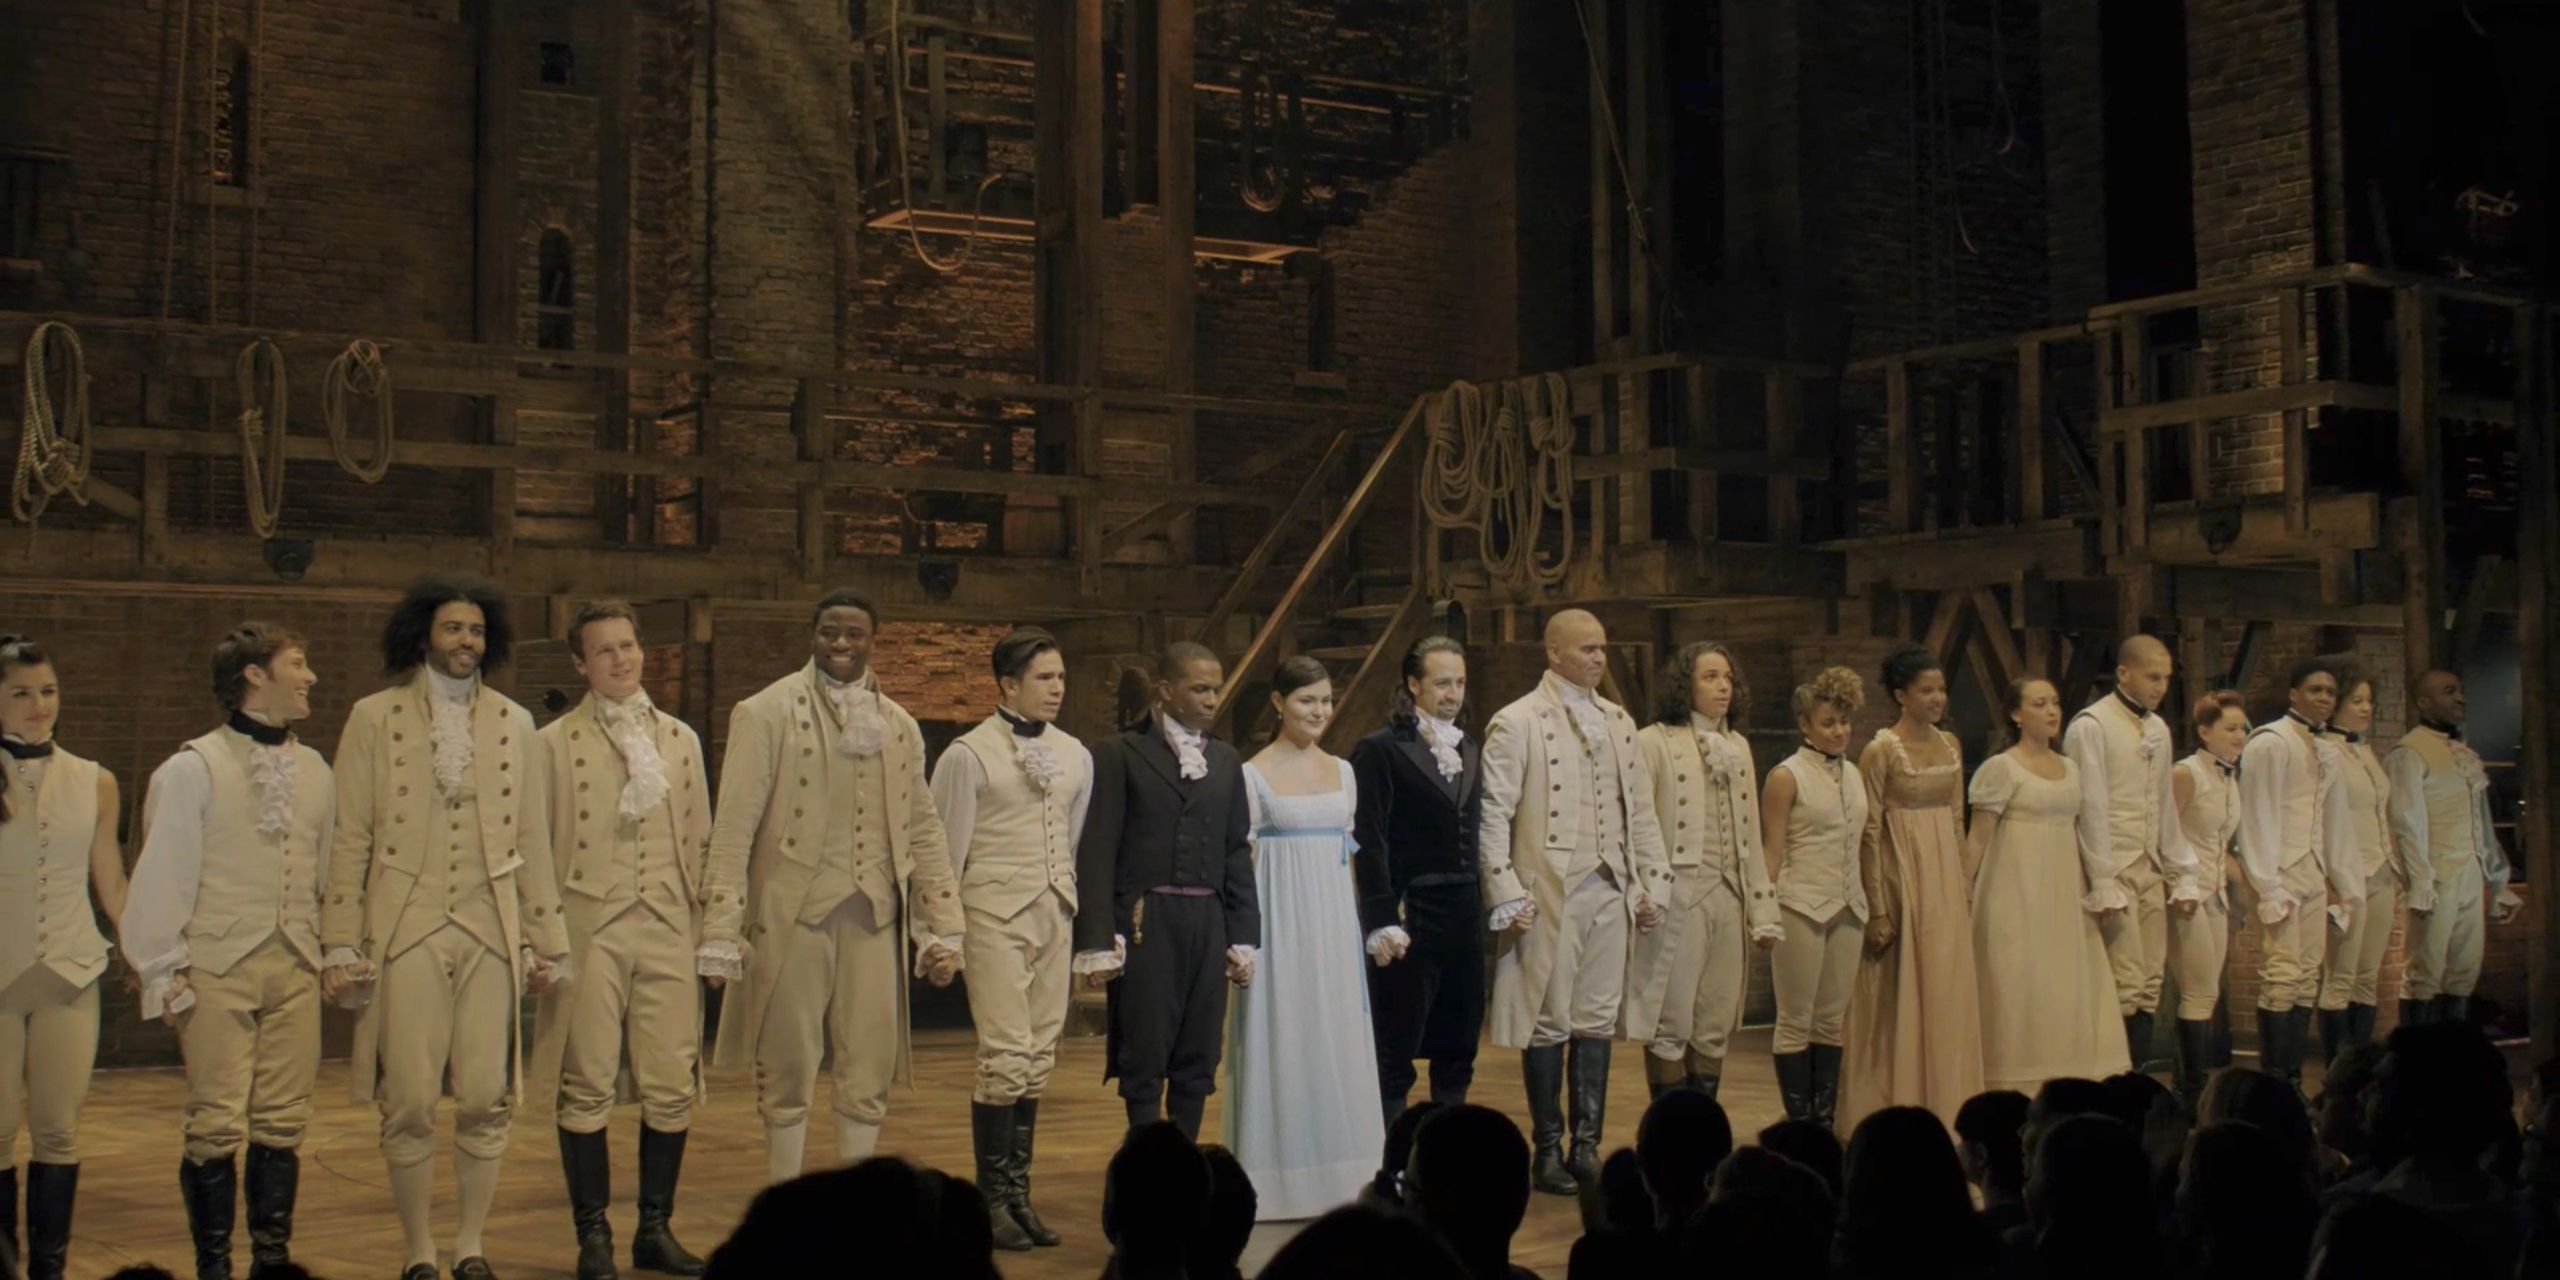 The original cast of the stage musical Hamilton